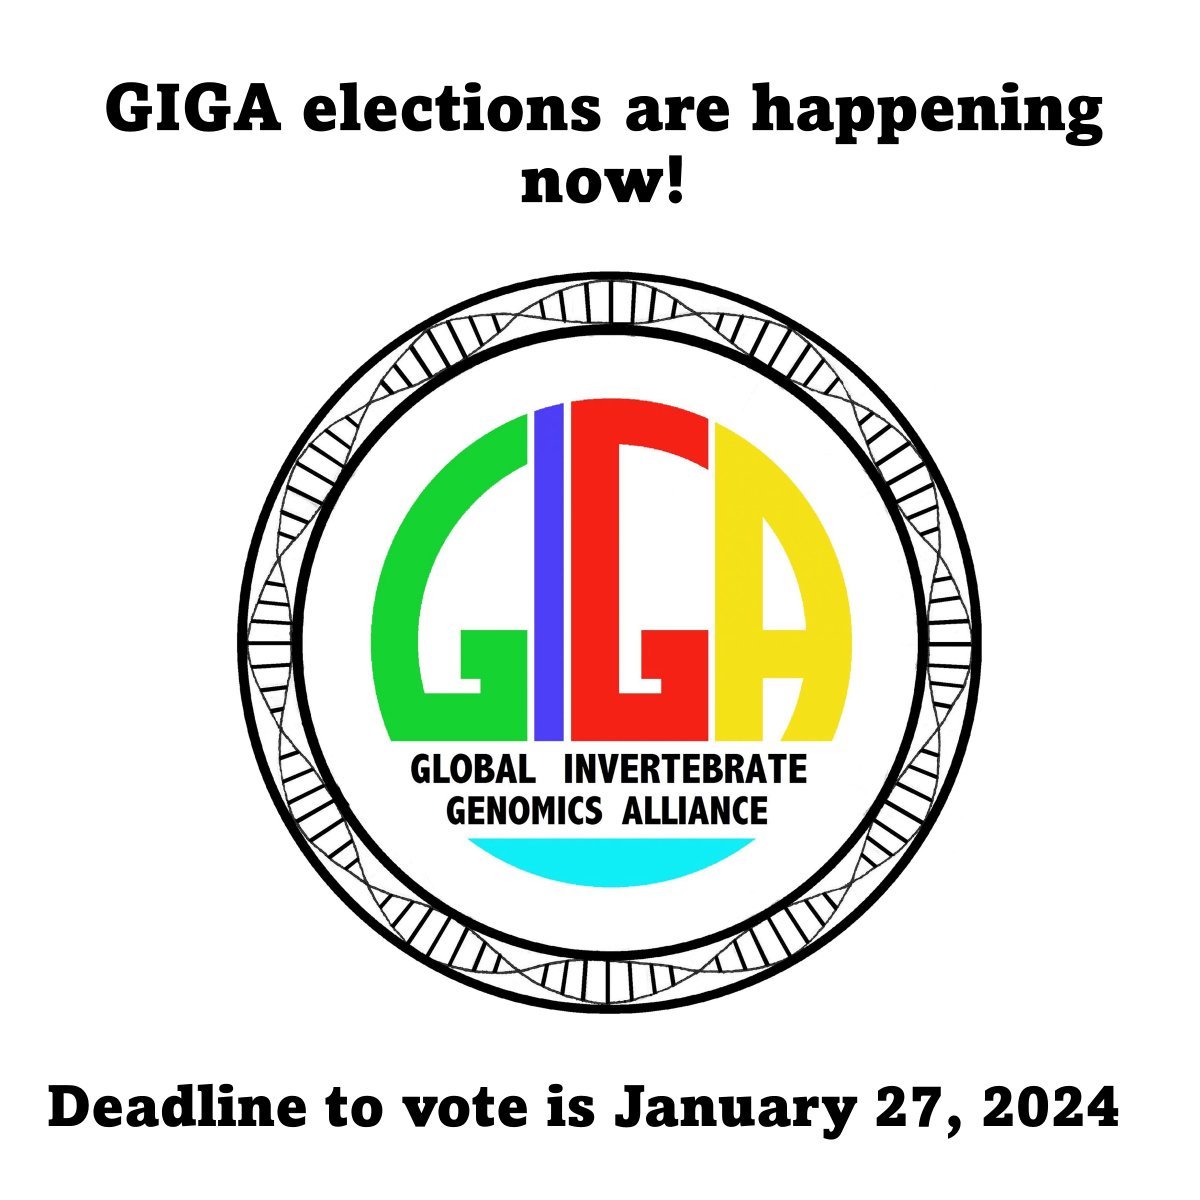 GIGA elections are happening now. GIGA members check your e-mail to vote for open GIGA board positions.